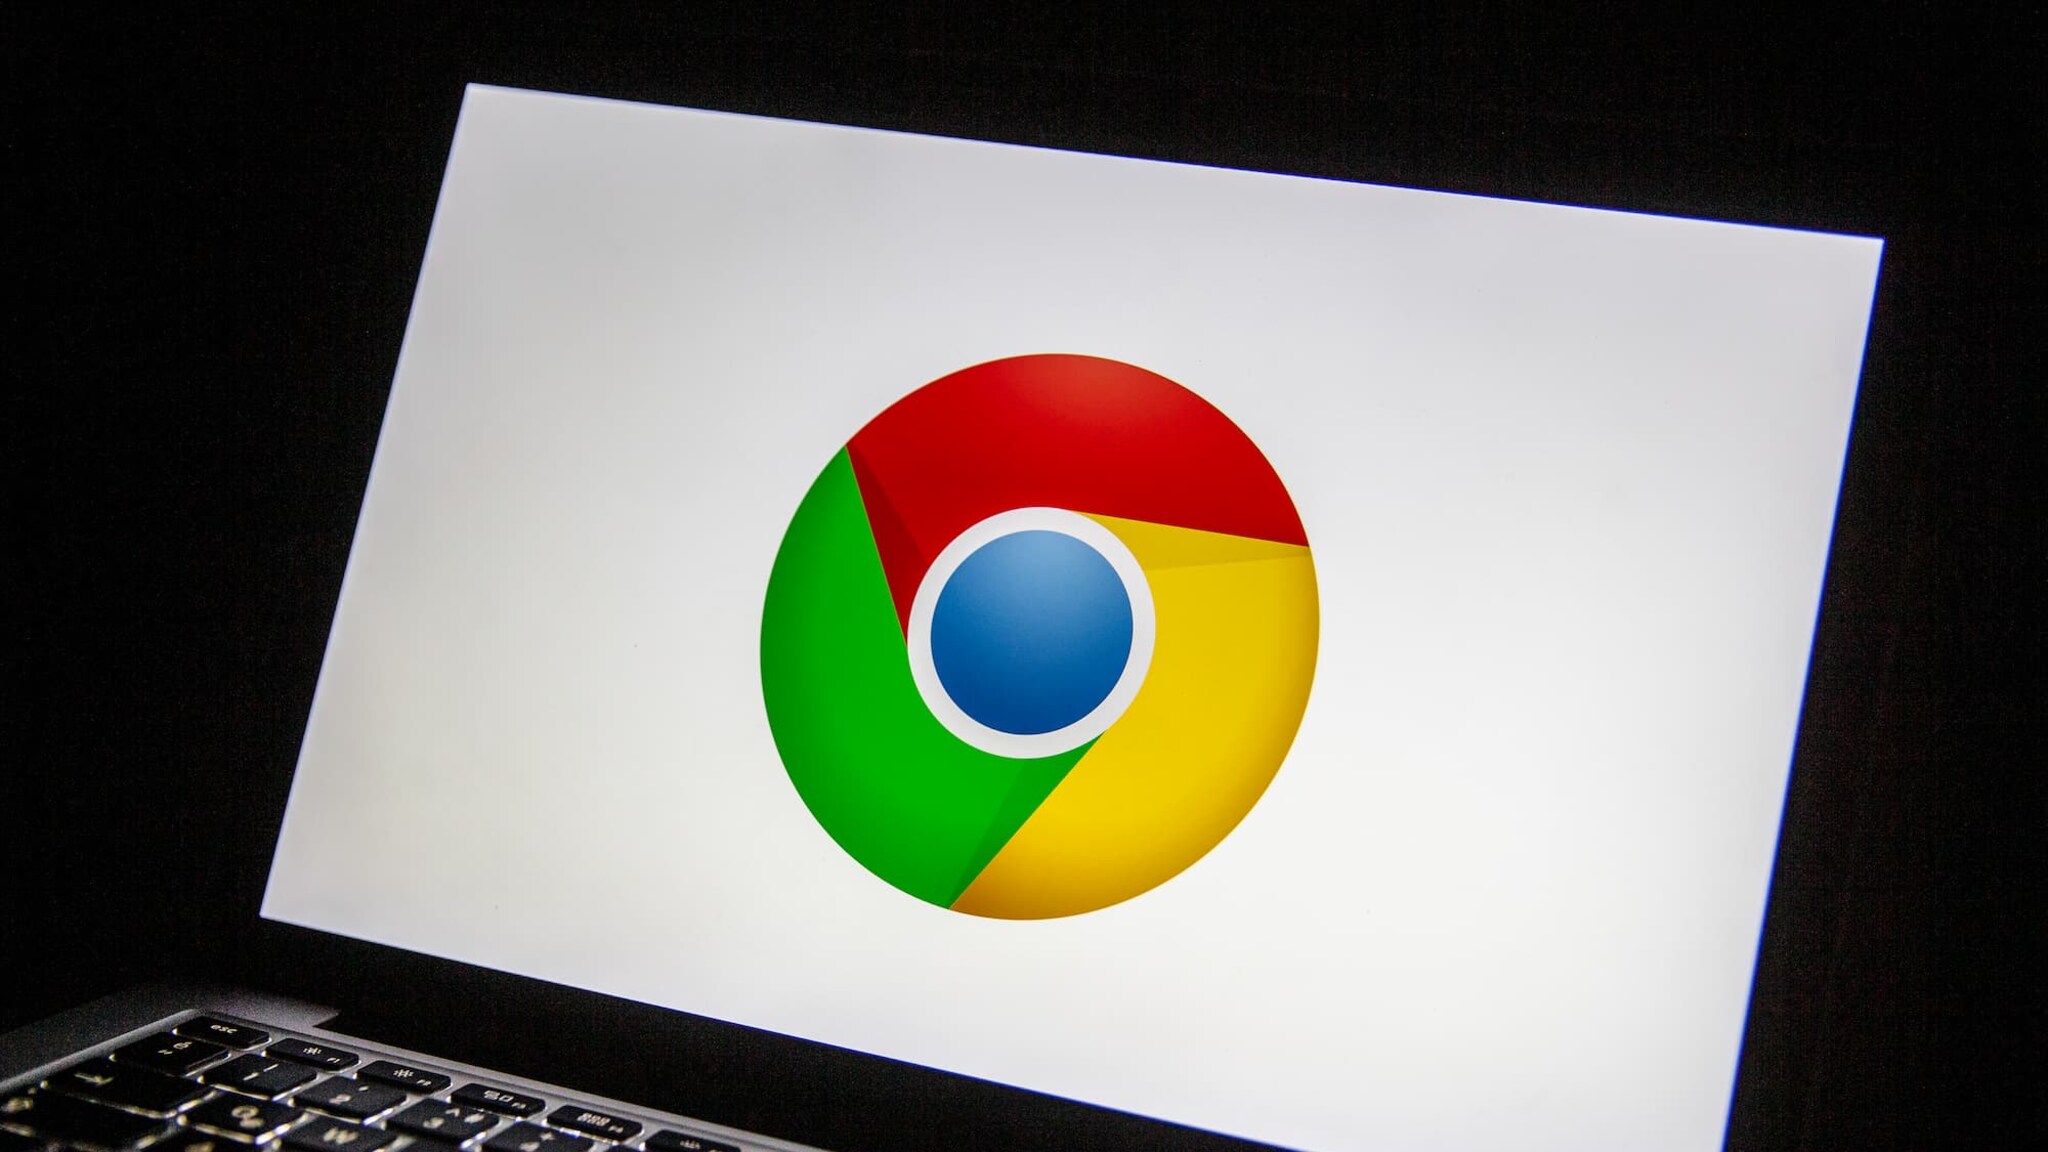 Google Chrome is now more economical with memory and power usage